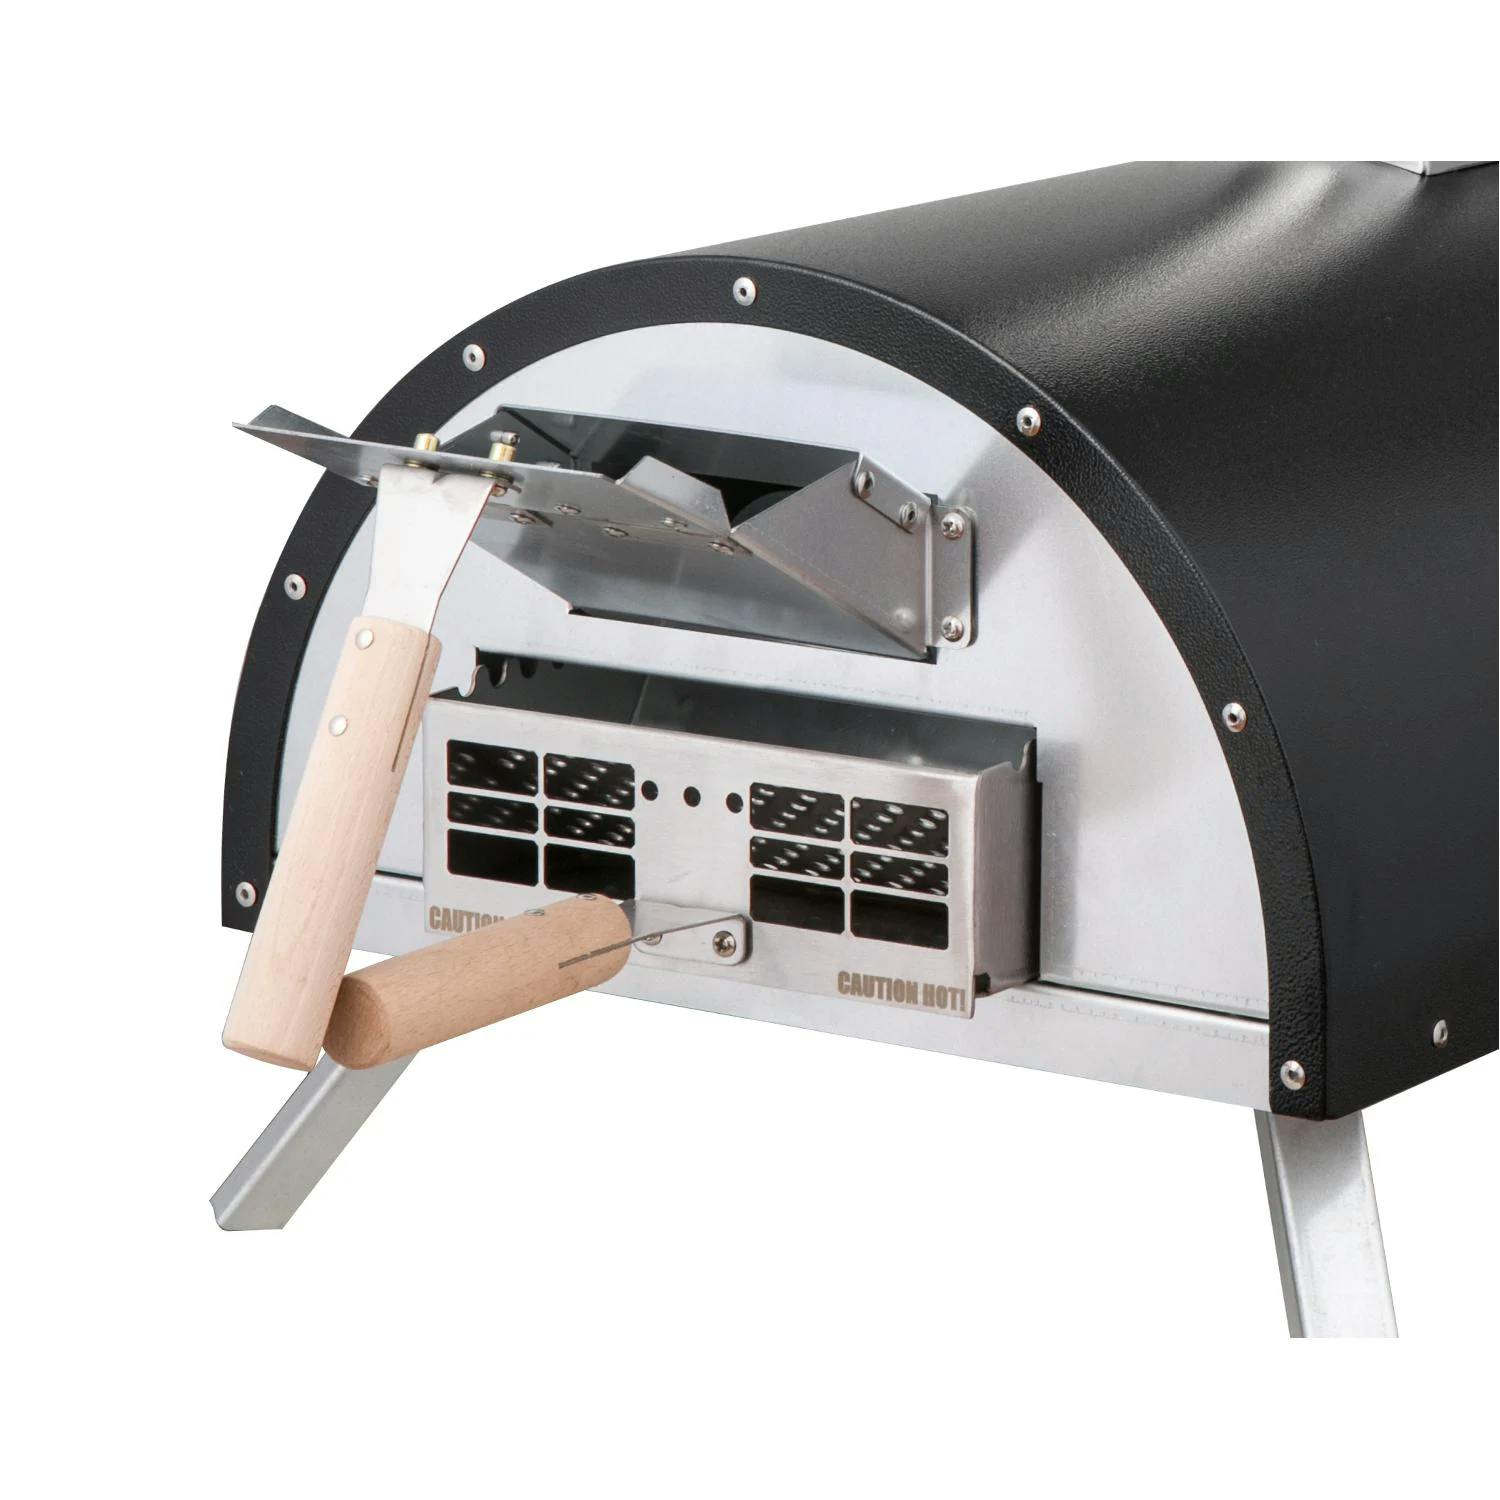 WPPO Le Peppe Portable Wood Fired Pizza Oven with Peel